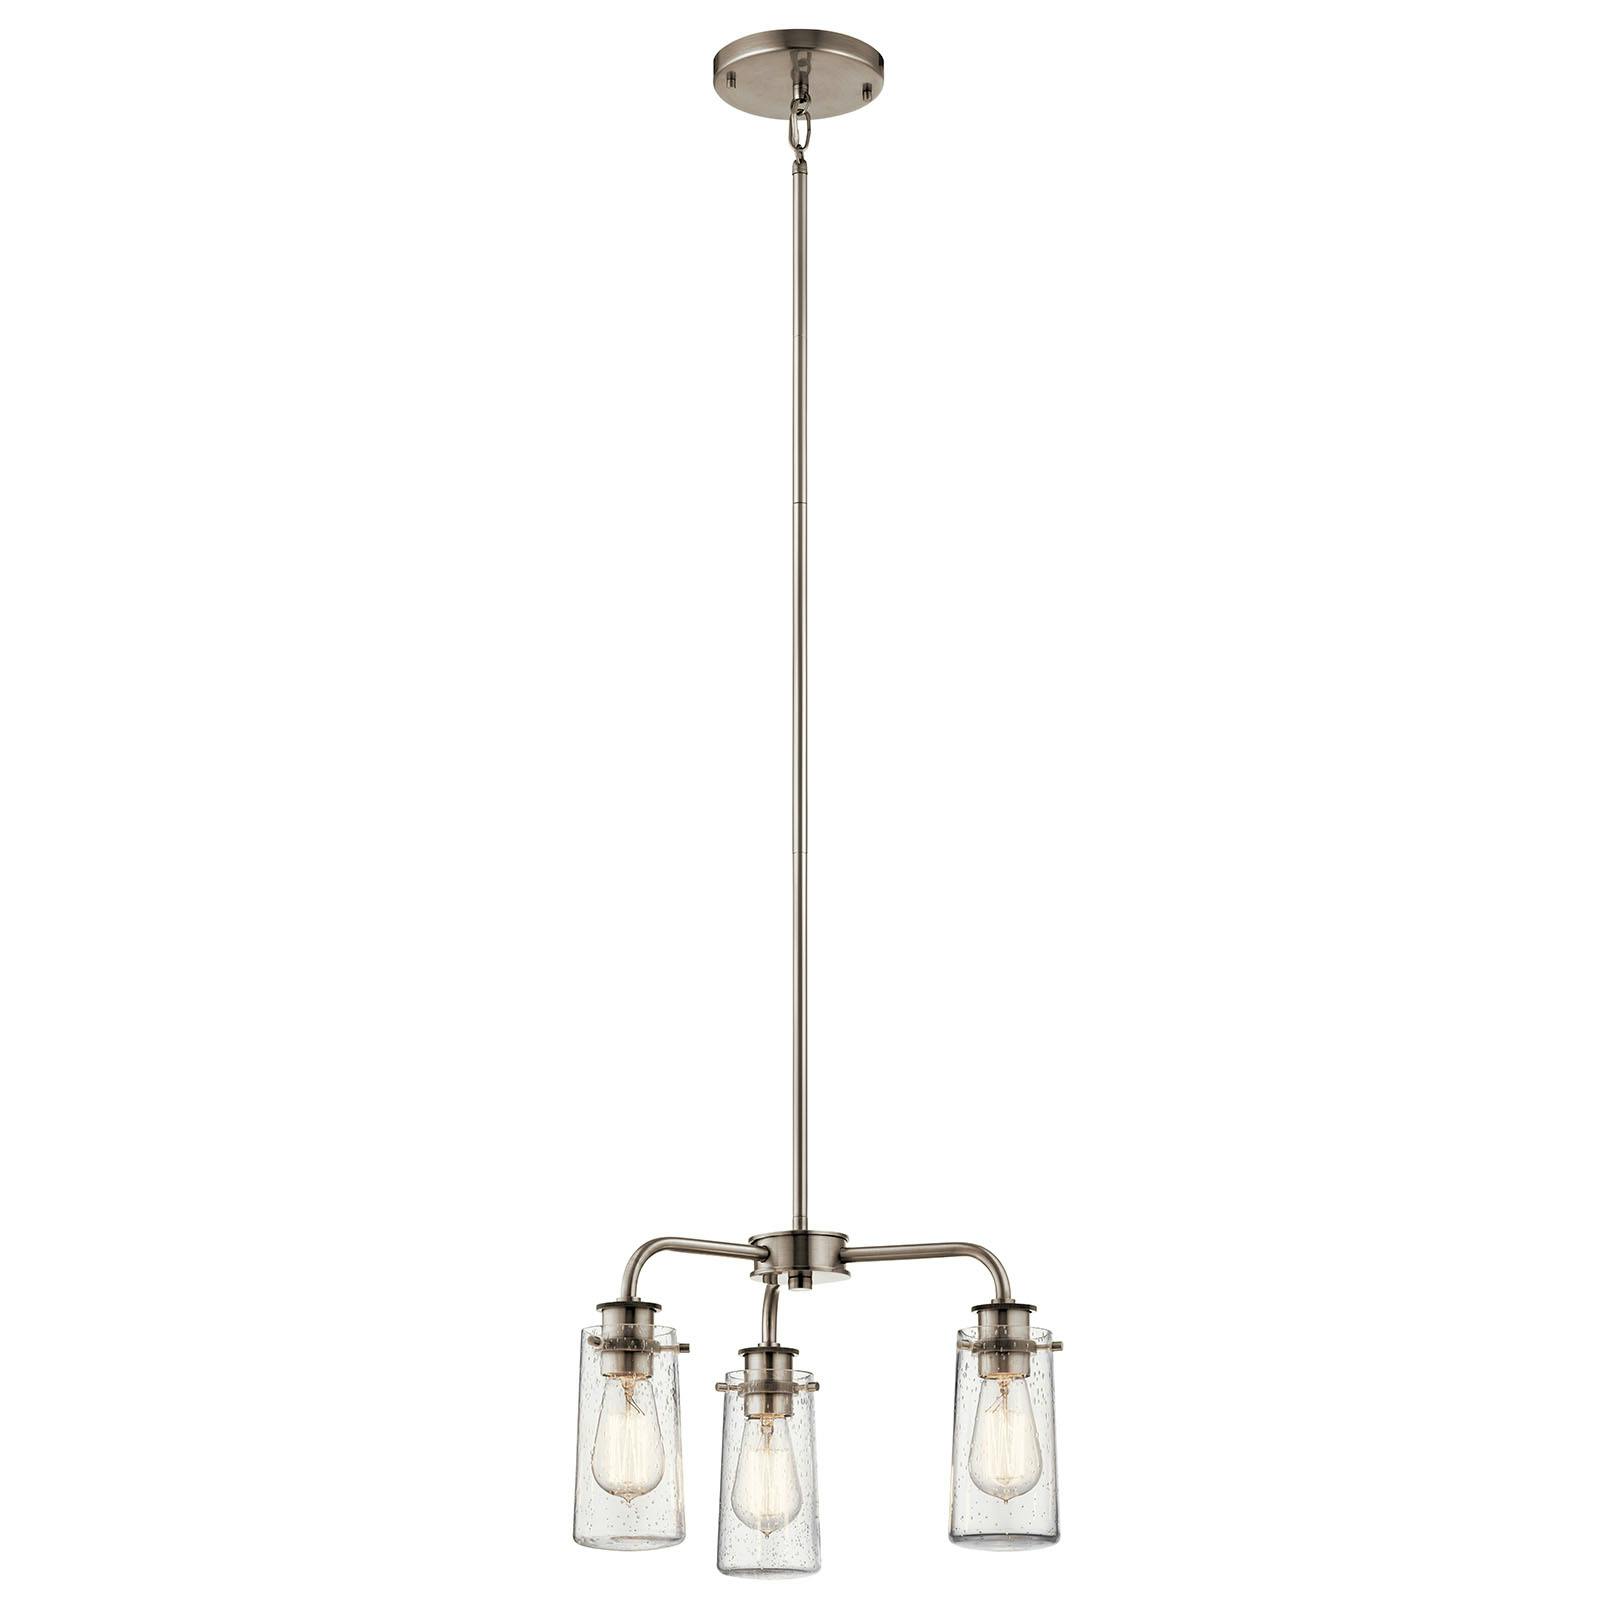 Braelyn Convertible Chandelier Pewter on a white background